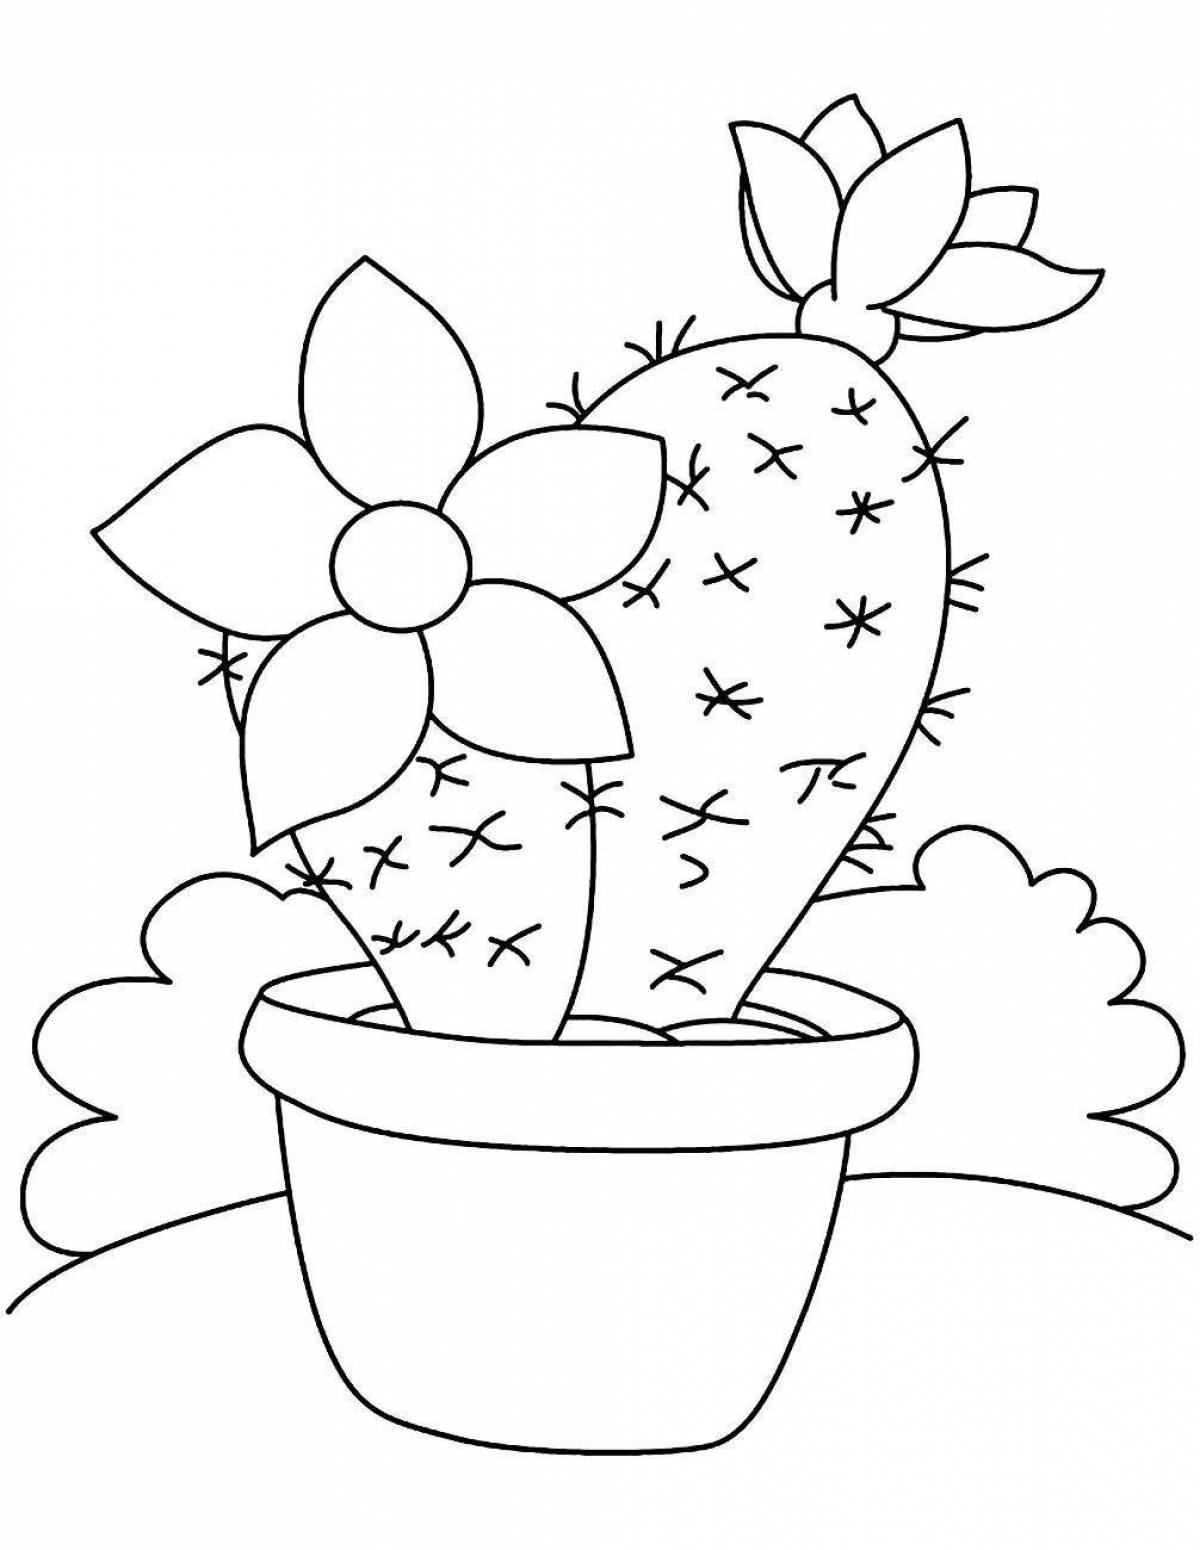 Coloring page dazzling indoor flower